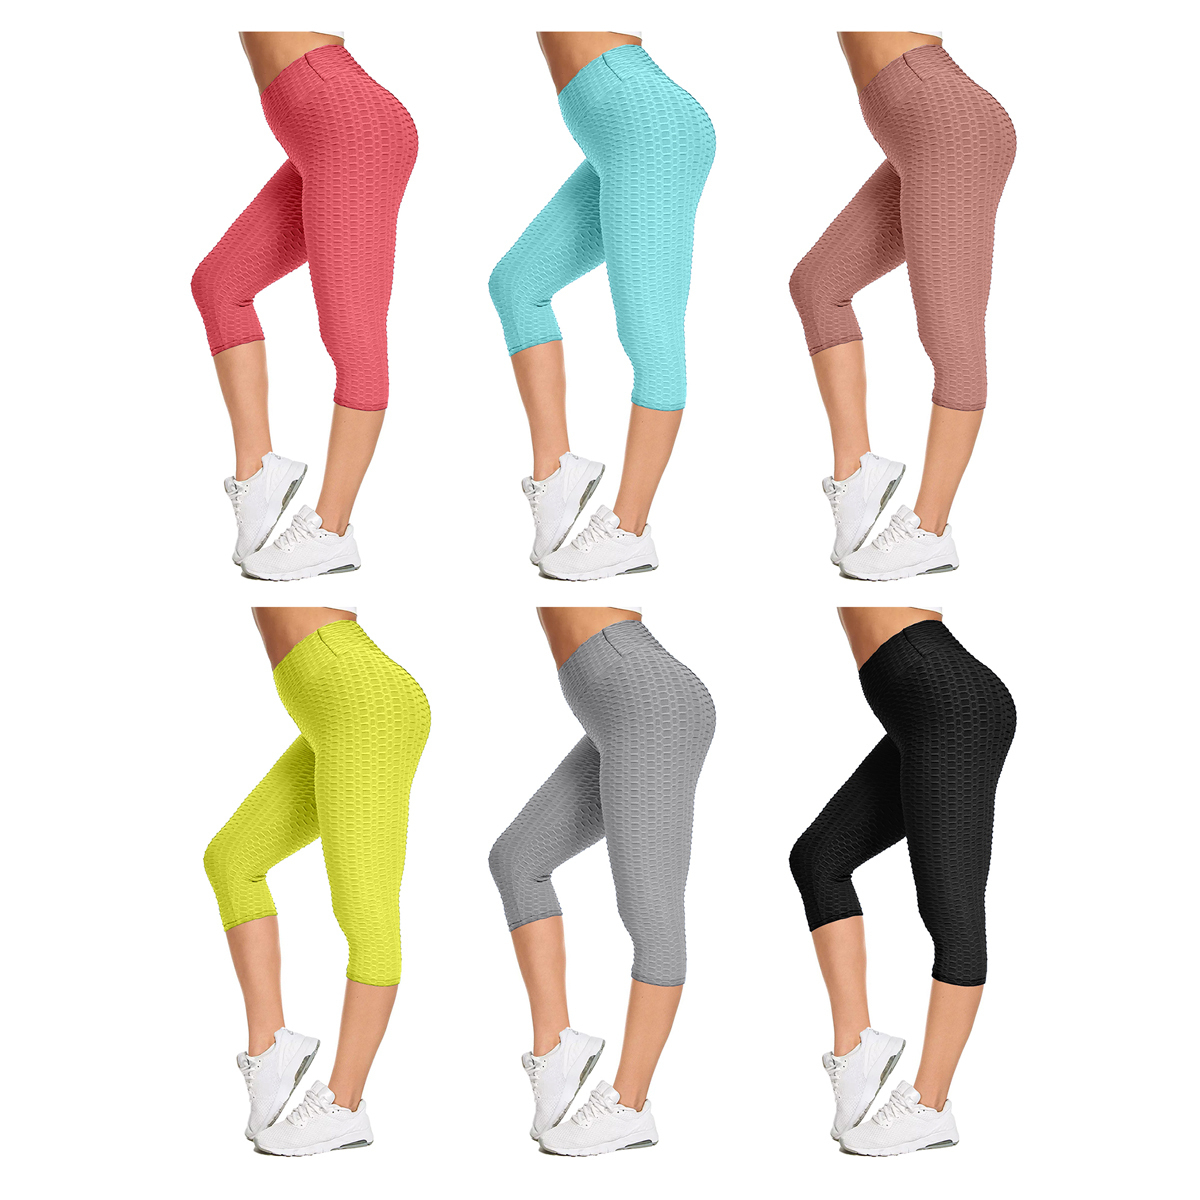 3-Pack: Women's High Waisted Anti Cellulite Leggings (Butt Lifting) - Solids, Small/Medium